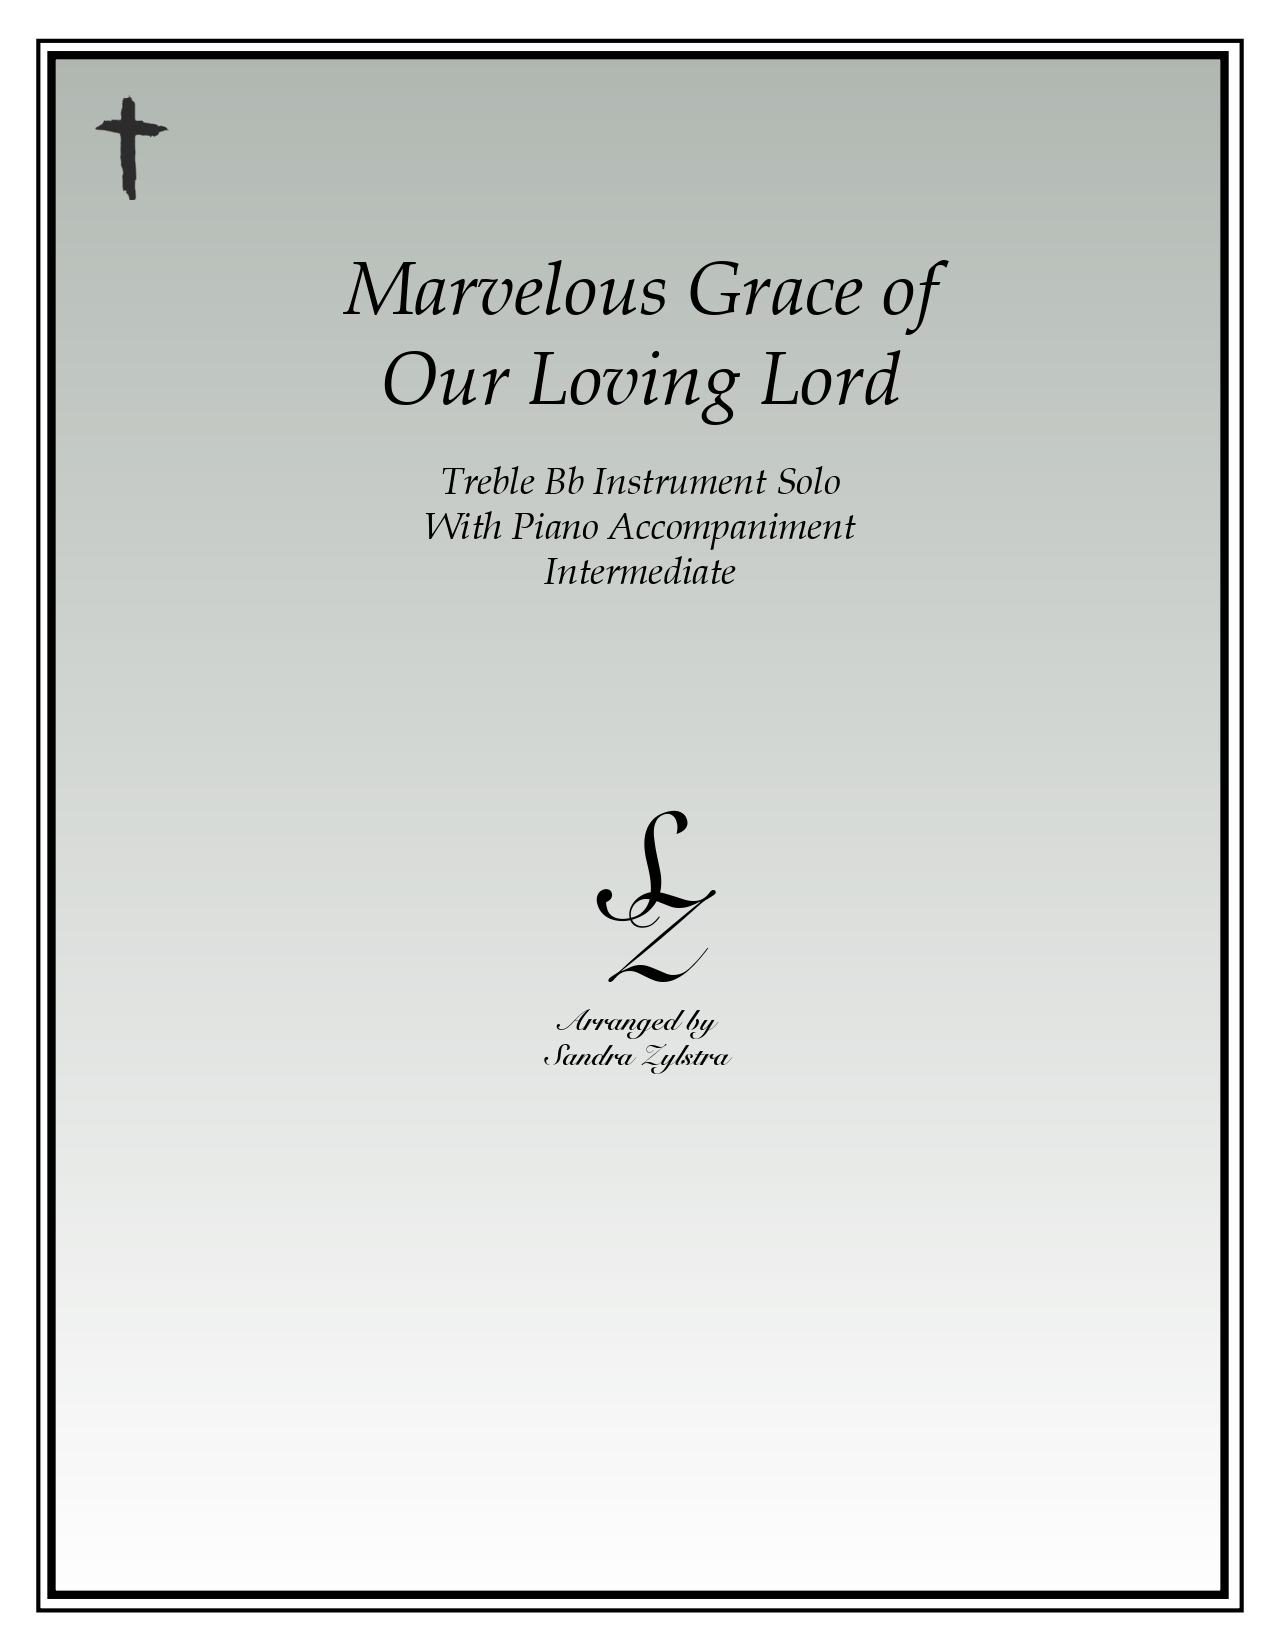 Marvelous Grace Of Our Loving Lord Bb instrument solo part cover page 00011